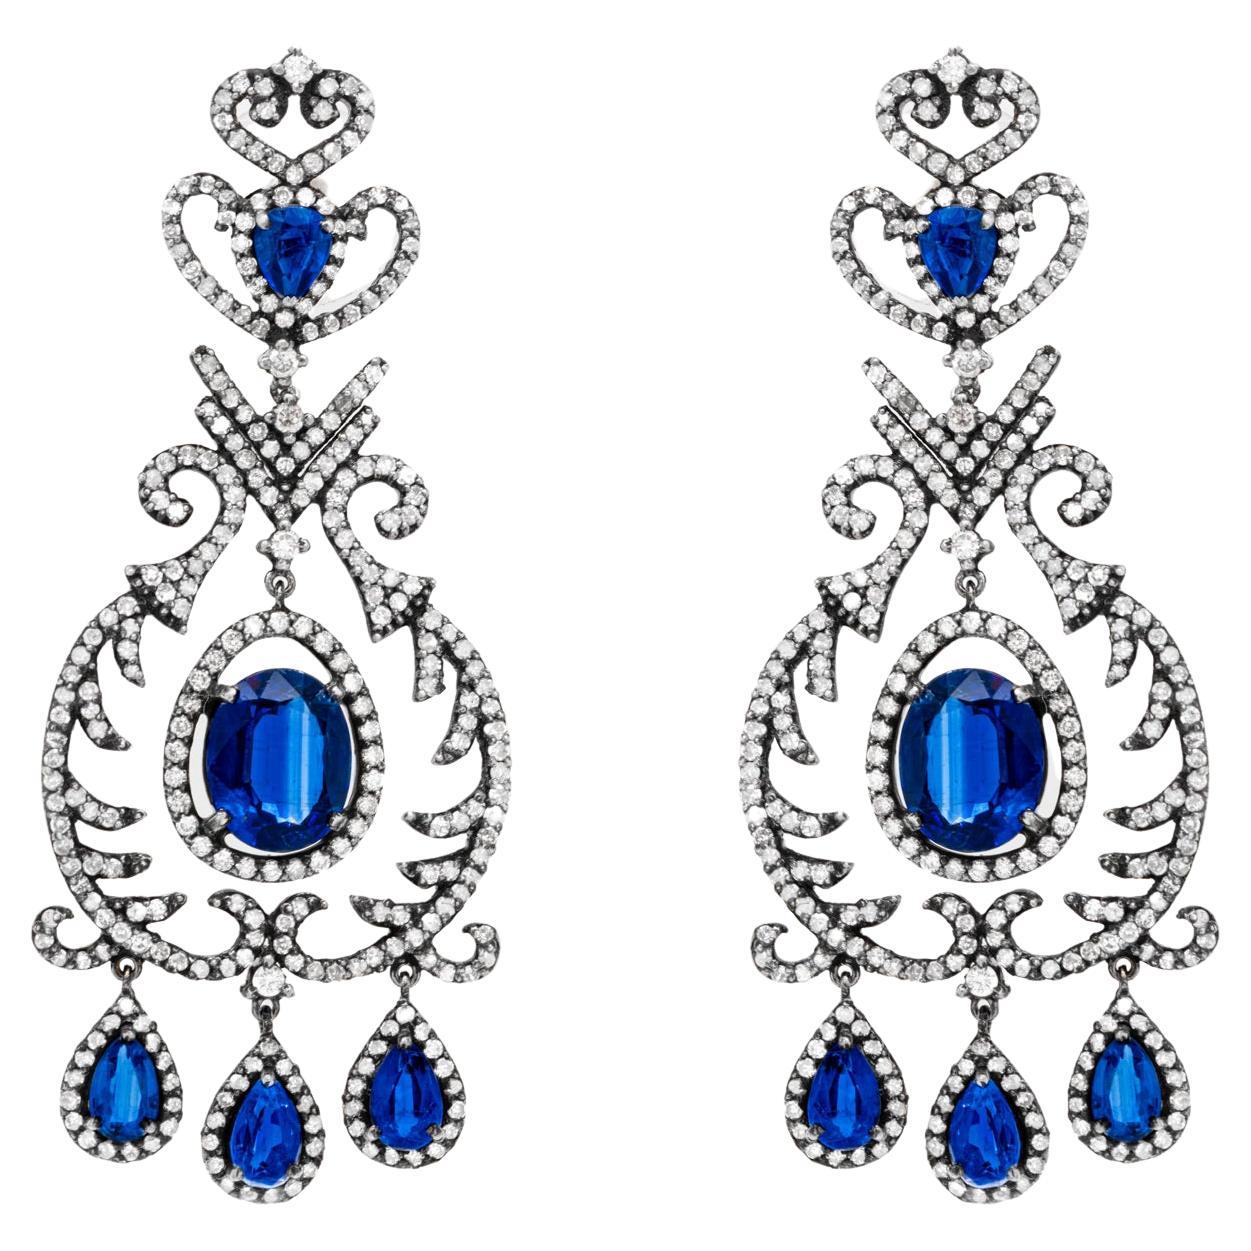 Kyanite Earrings 9.85 Carats with Diamonds 3.80 Carats Silver For Sale